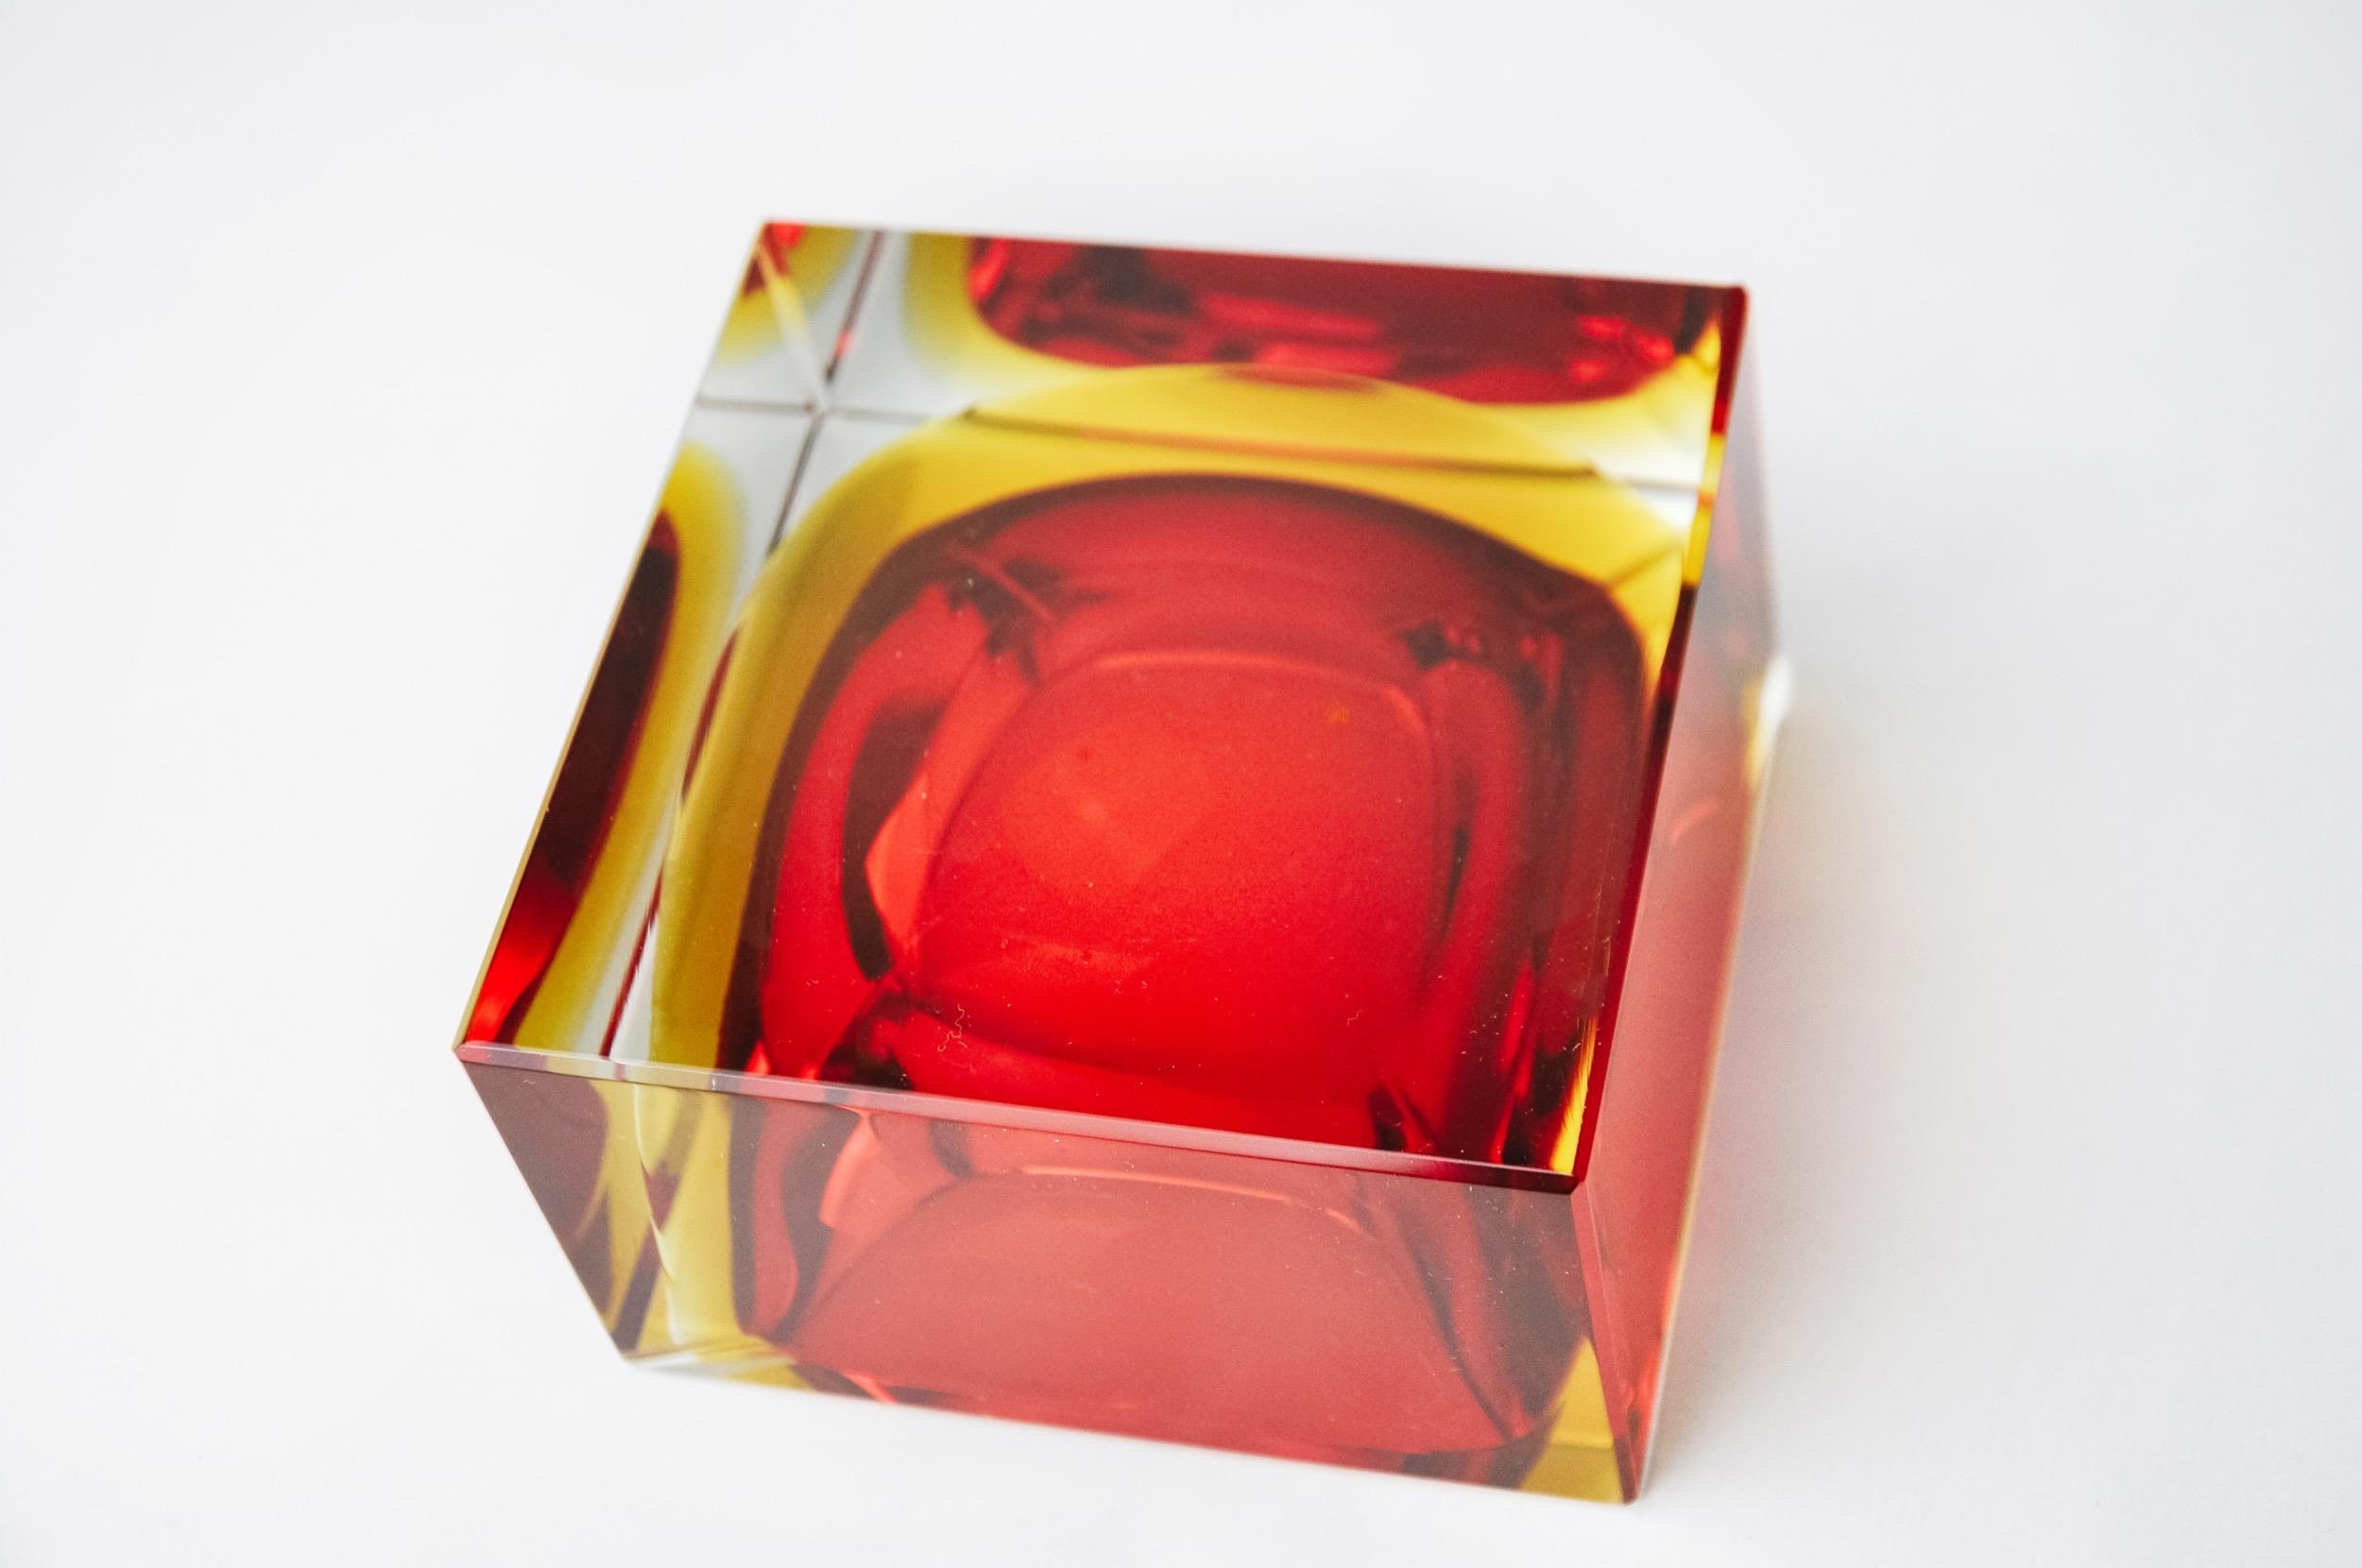 Crystal Red and yellow cubic Sommerso ashtray by Seguso, Murano, Italy, 1970 For Sale